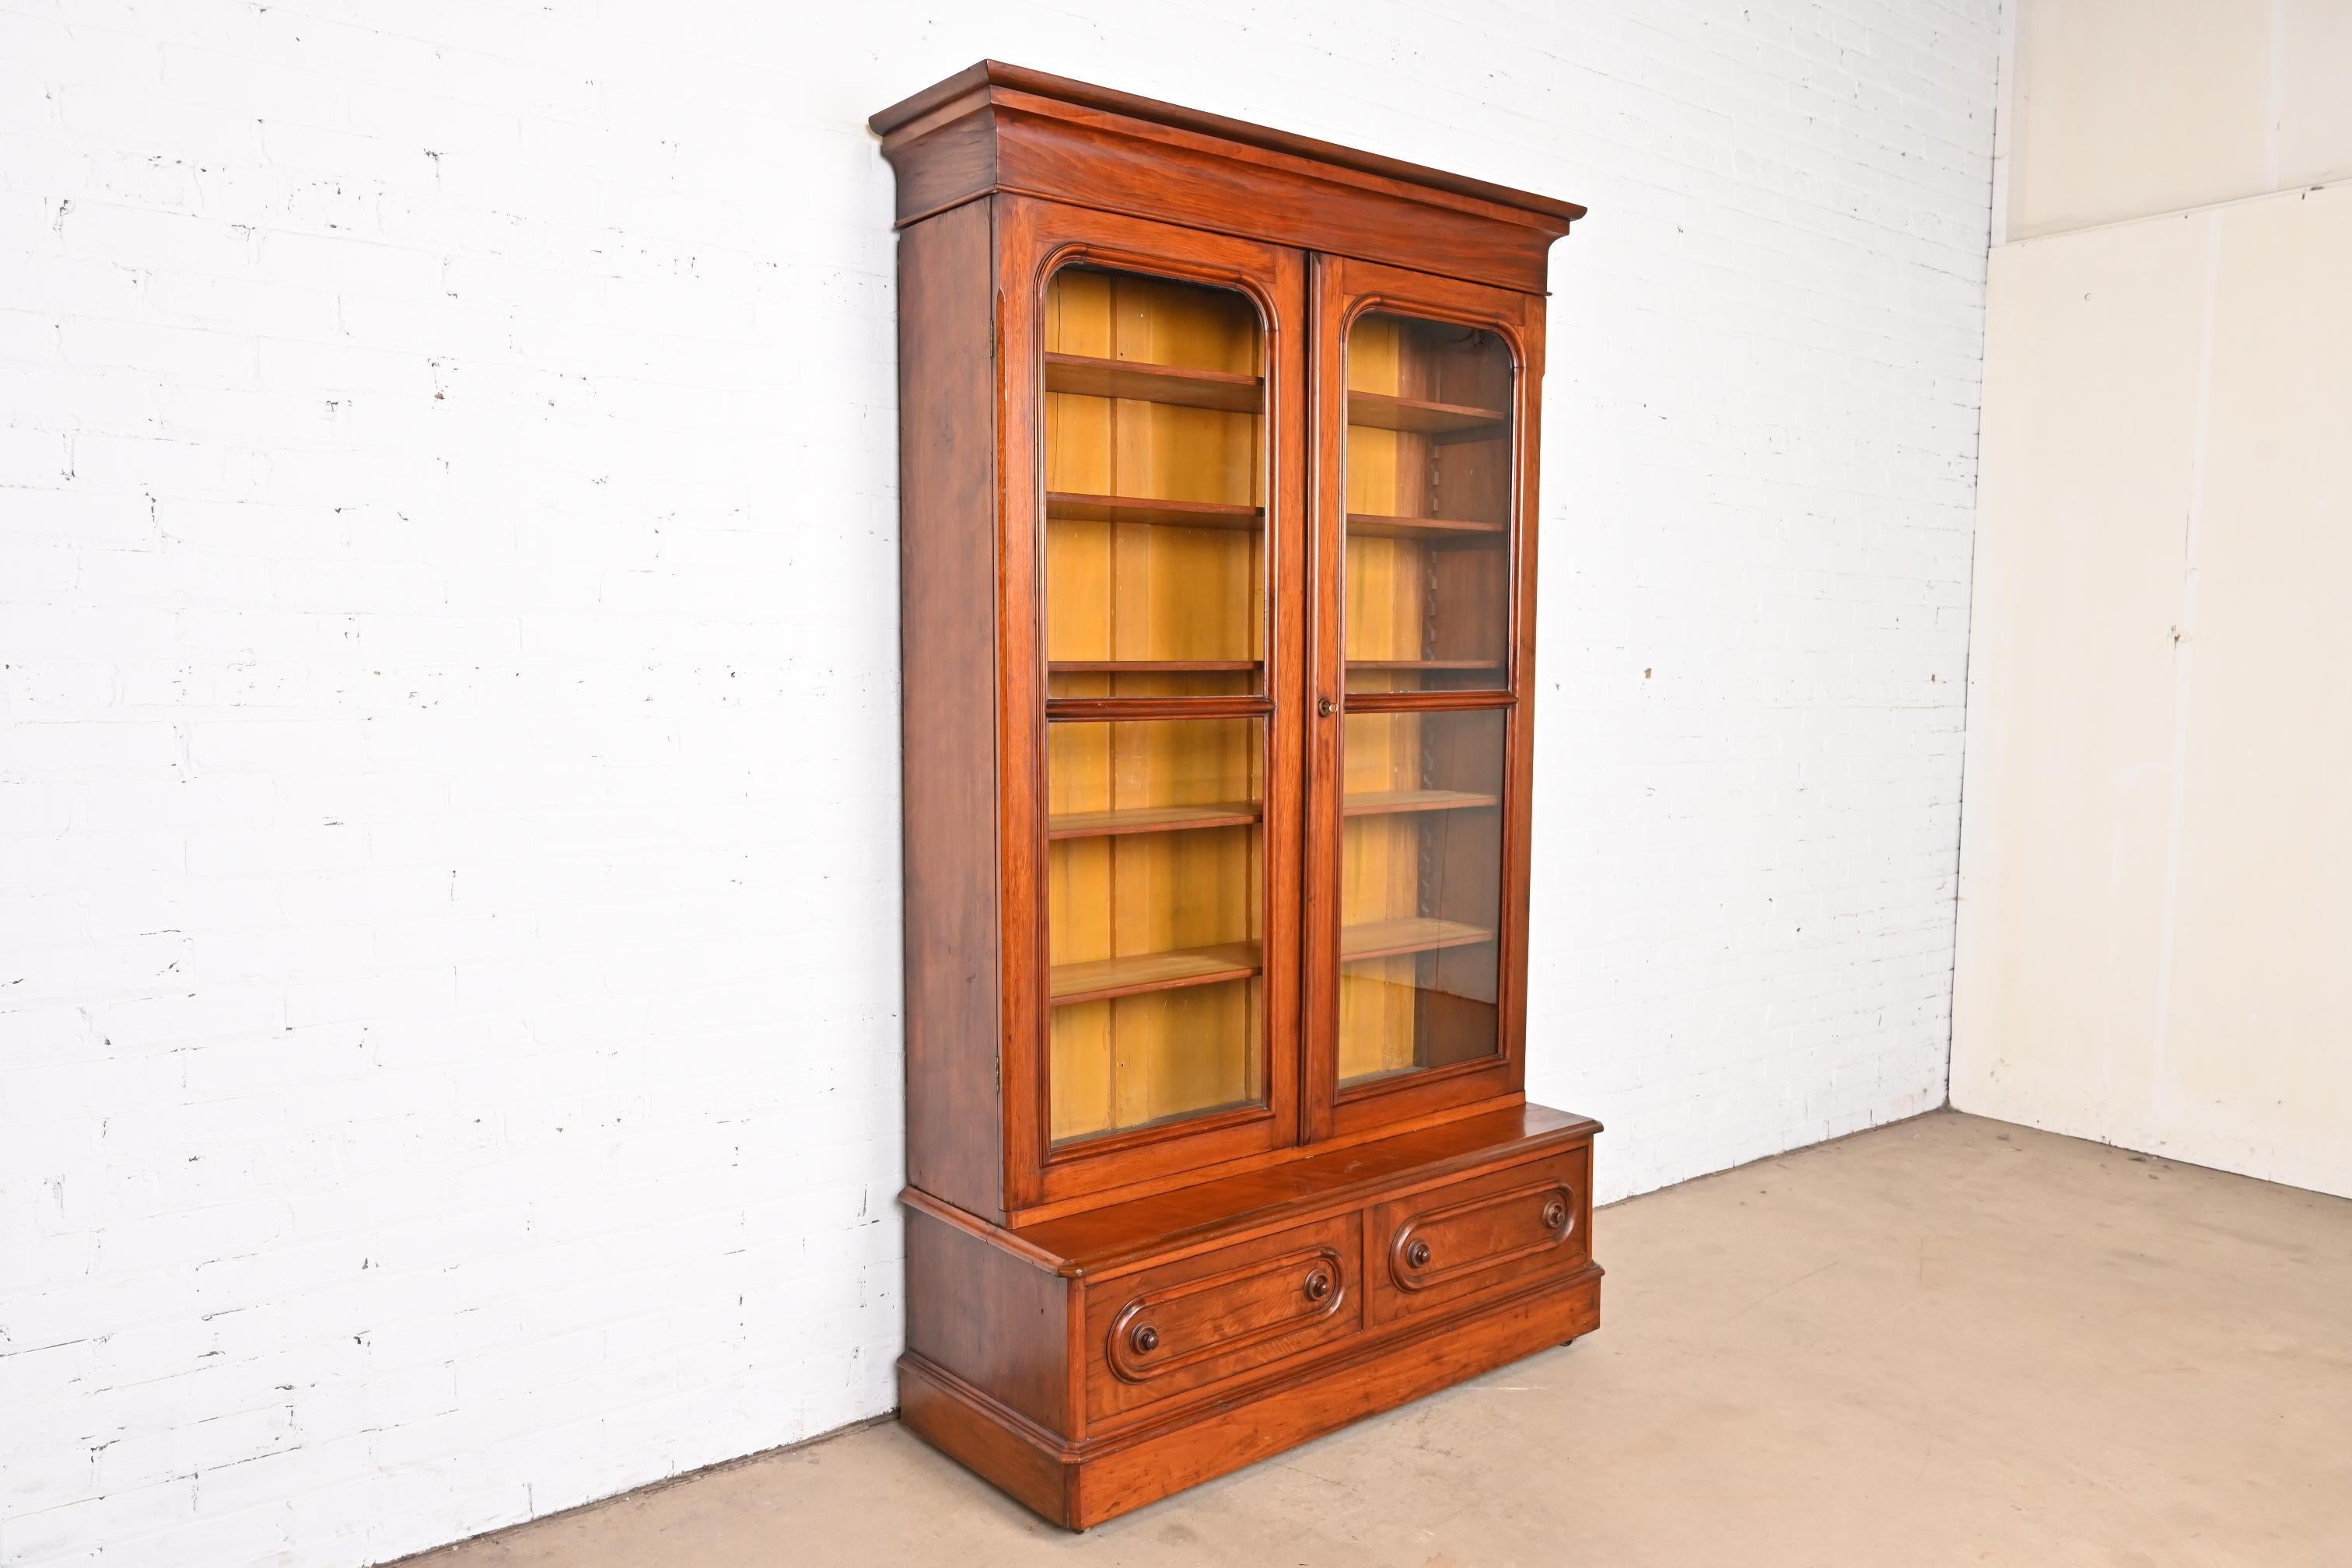 American Antique Victorian Carved Walnut Glass Front Bookcase Cabinet, Circa 1880s For Sale